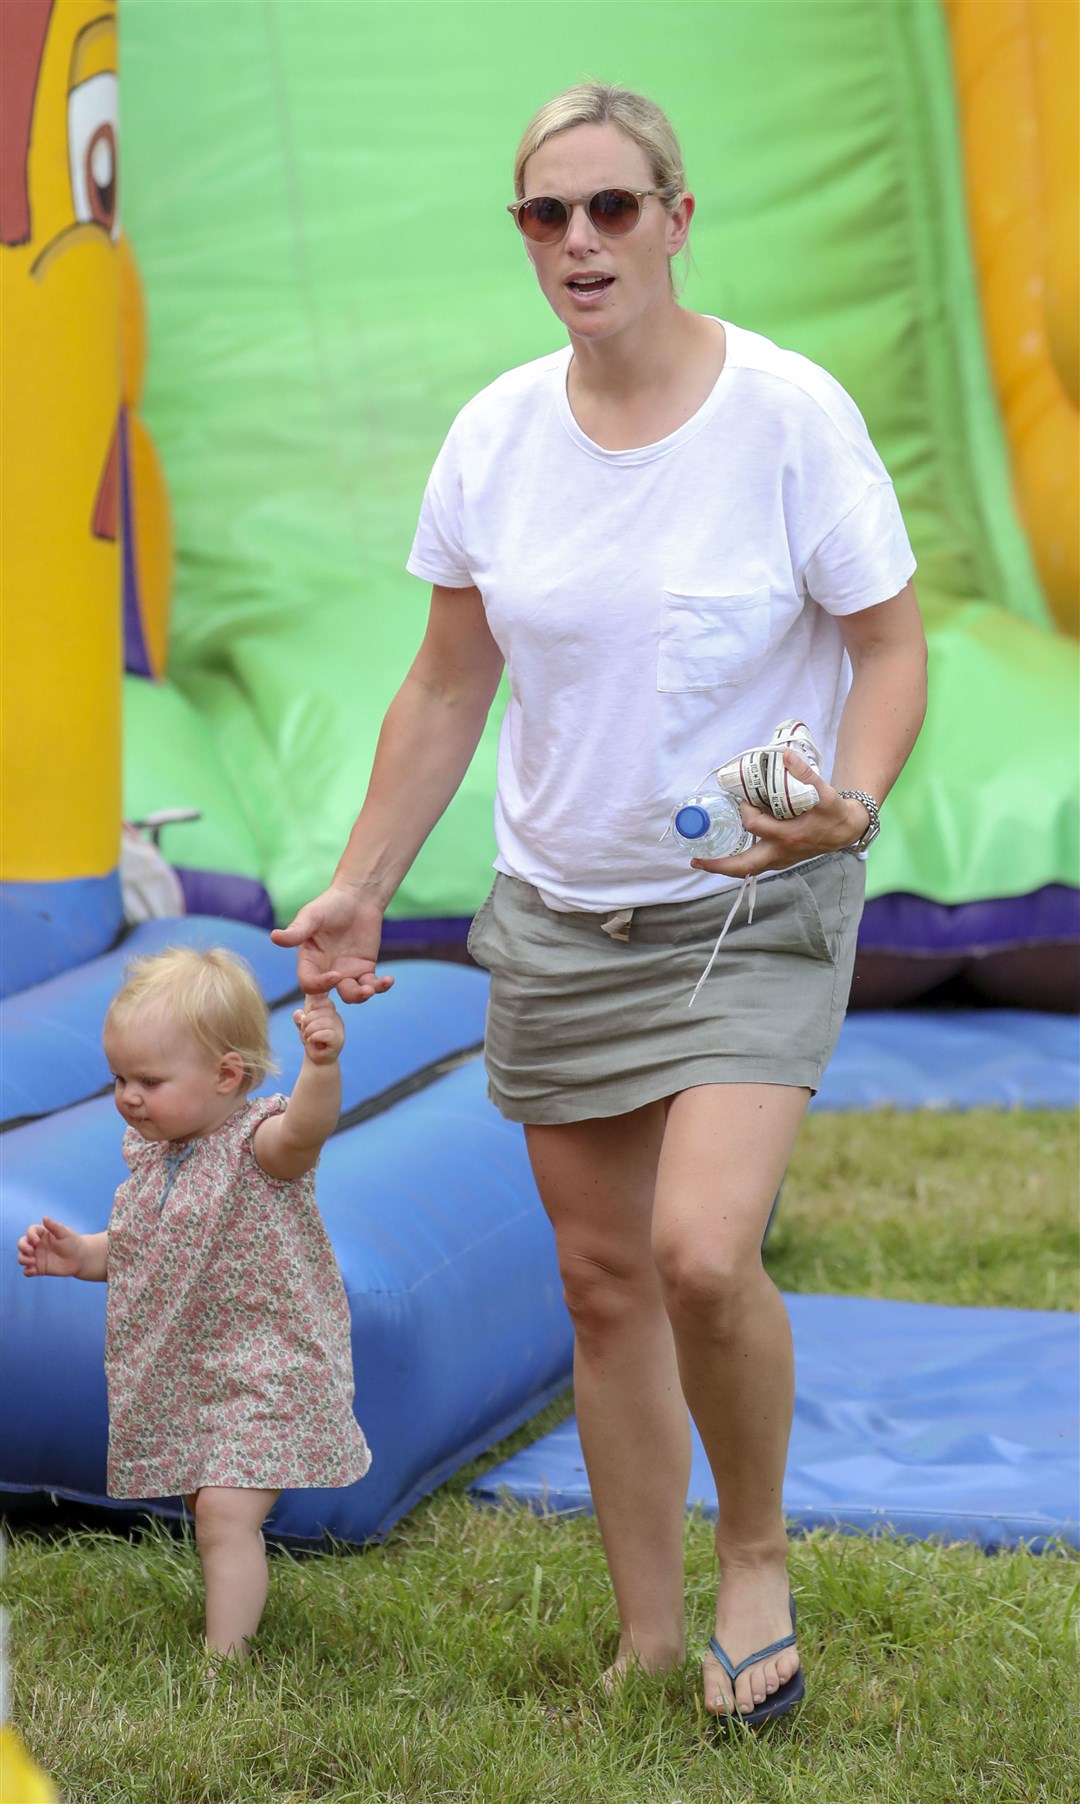 Zara Tindall with baby daughter Lena in 2019 (Steve Parsons/PA)